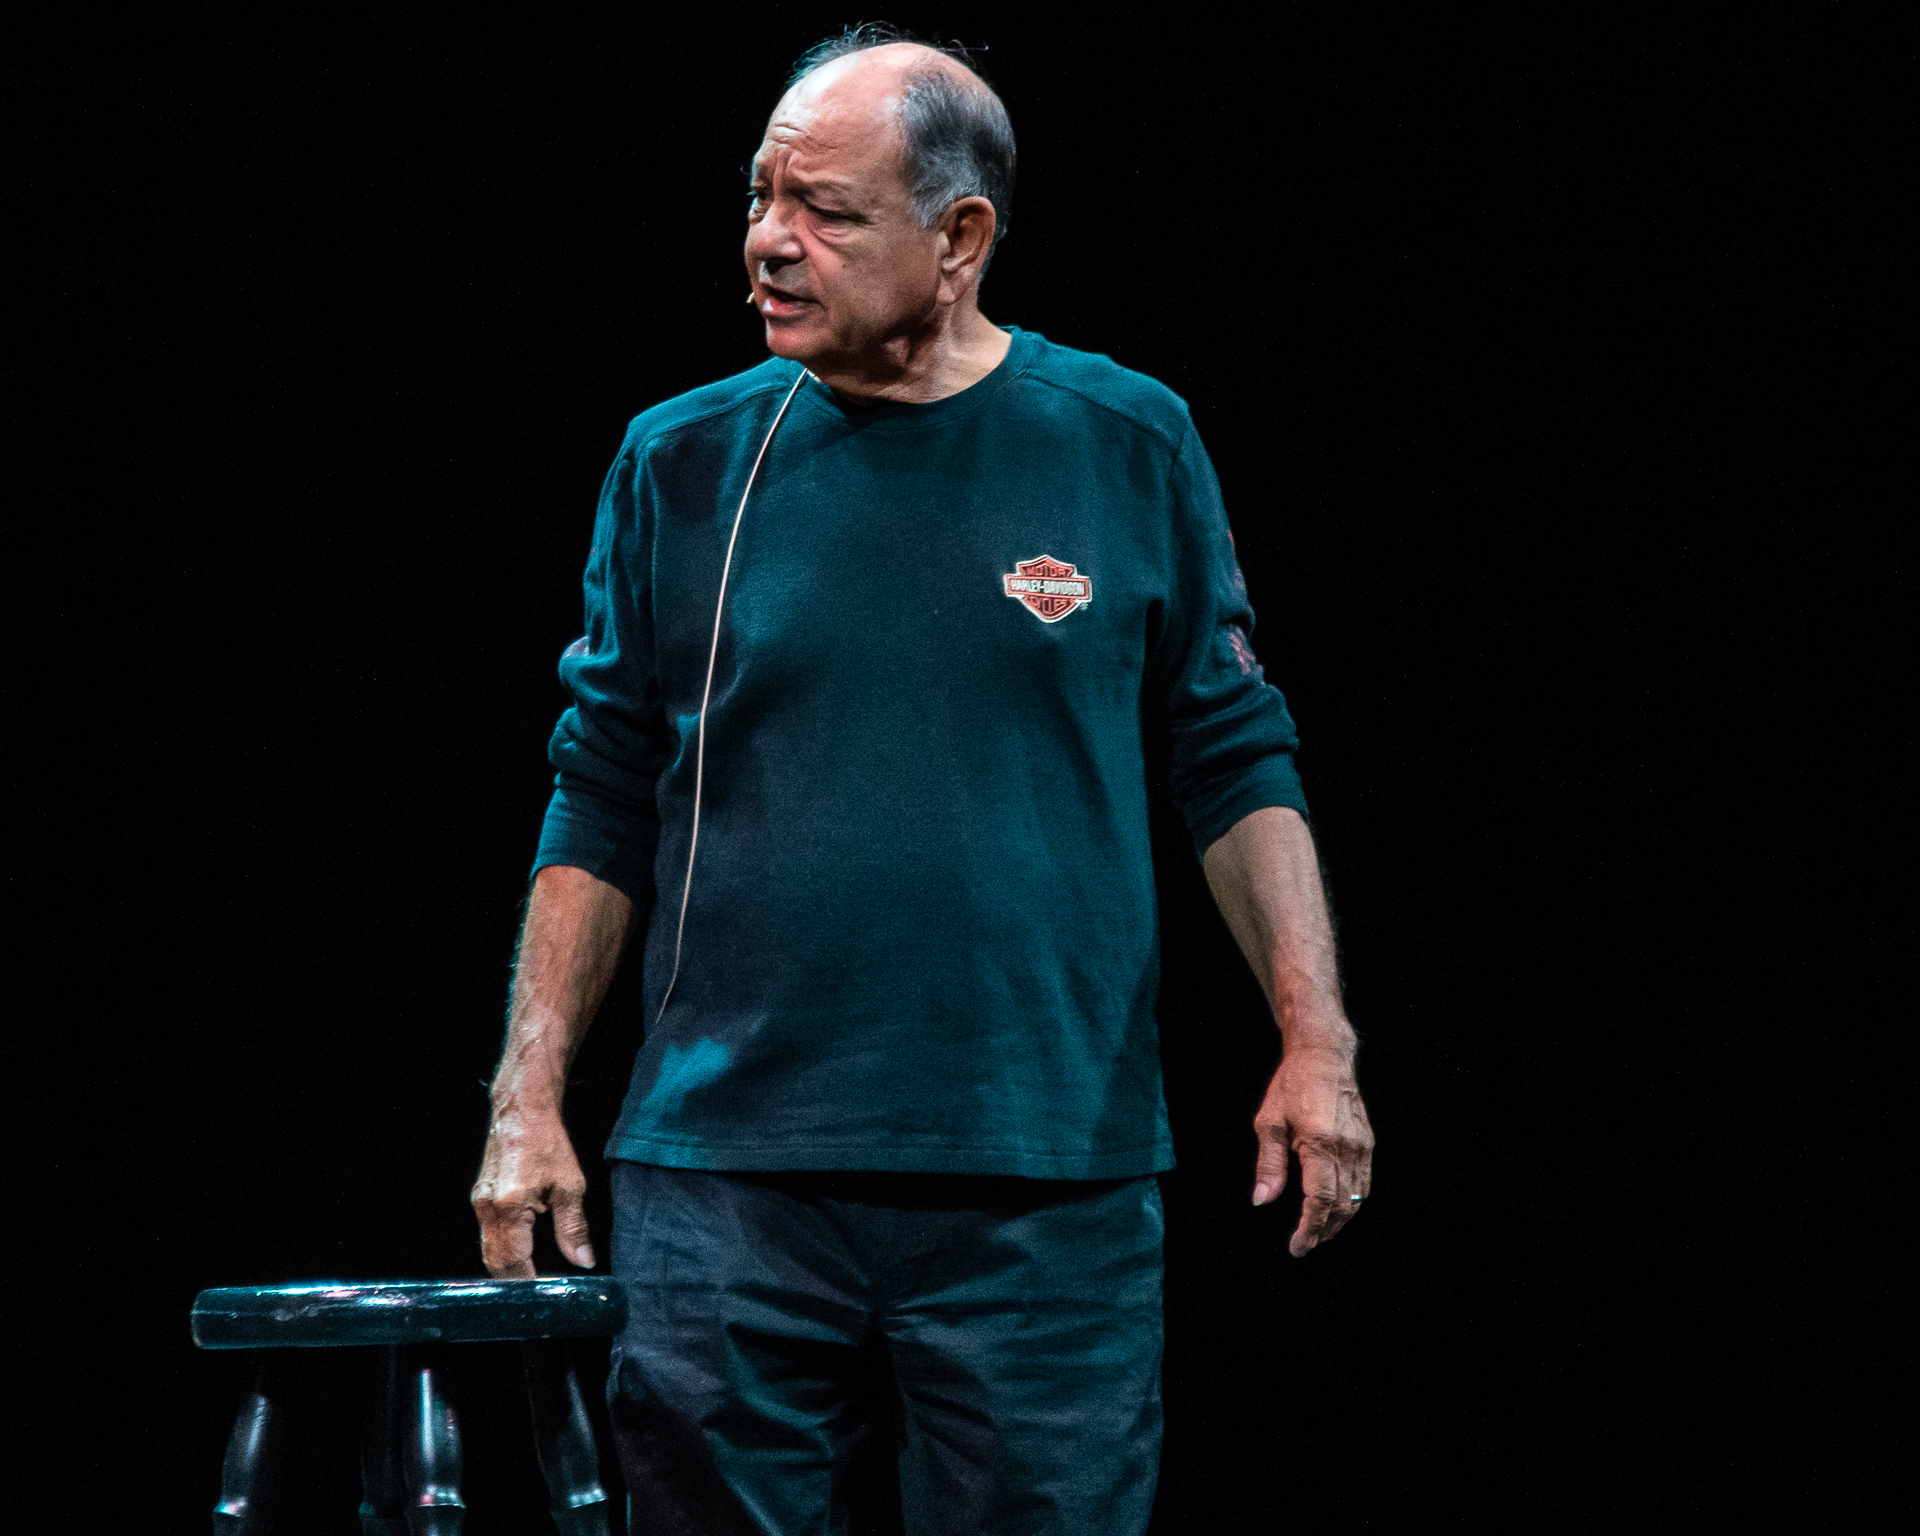 Cheech Marin stands on stage beside a stool, sporting a Harley Davidson long sleeve shirt. His expression is quizzical, adding a touch of curiosity and intrigue to the atmosphere.